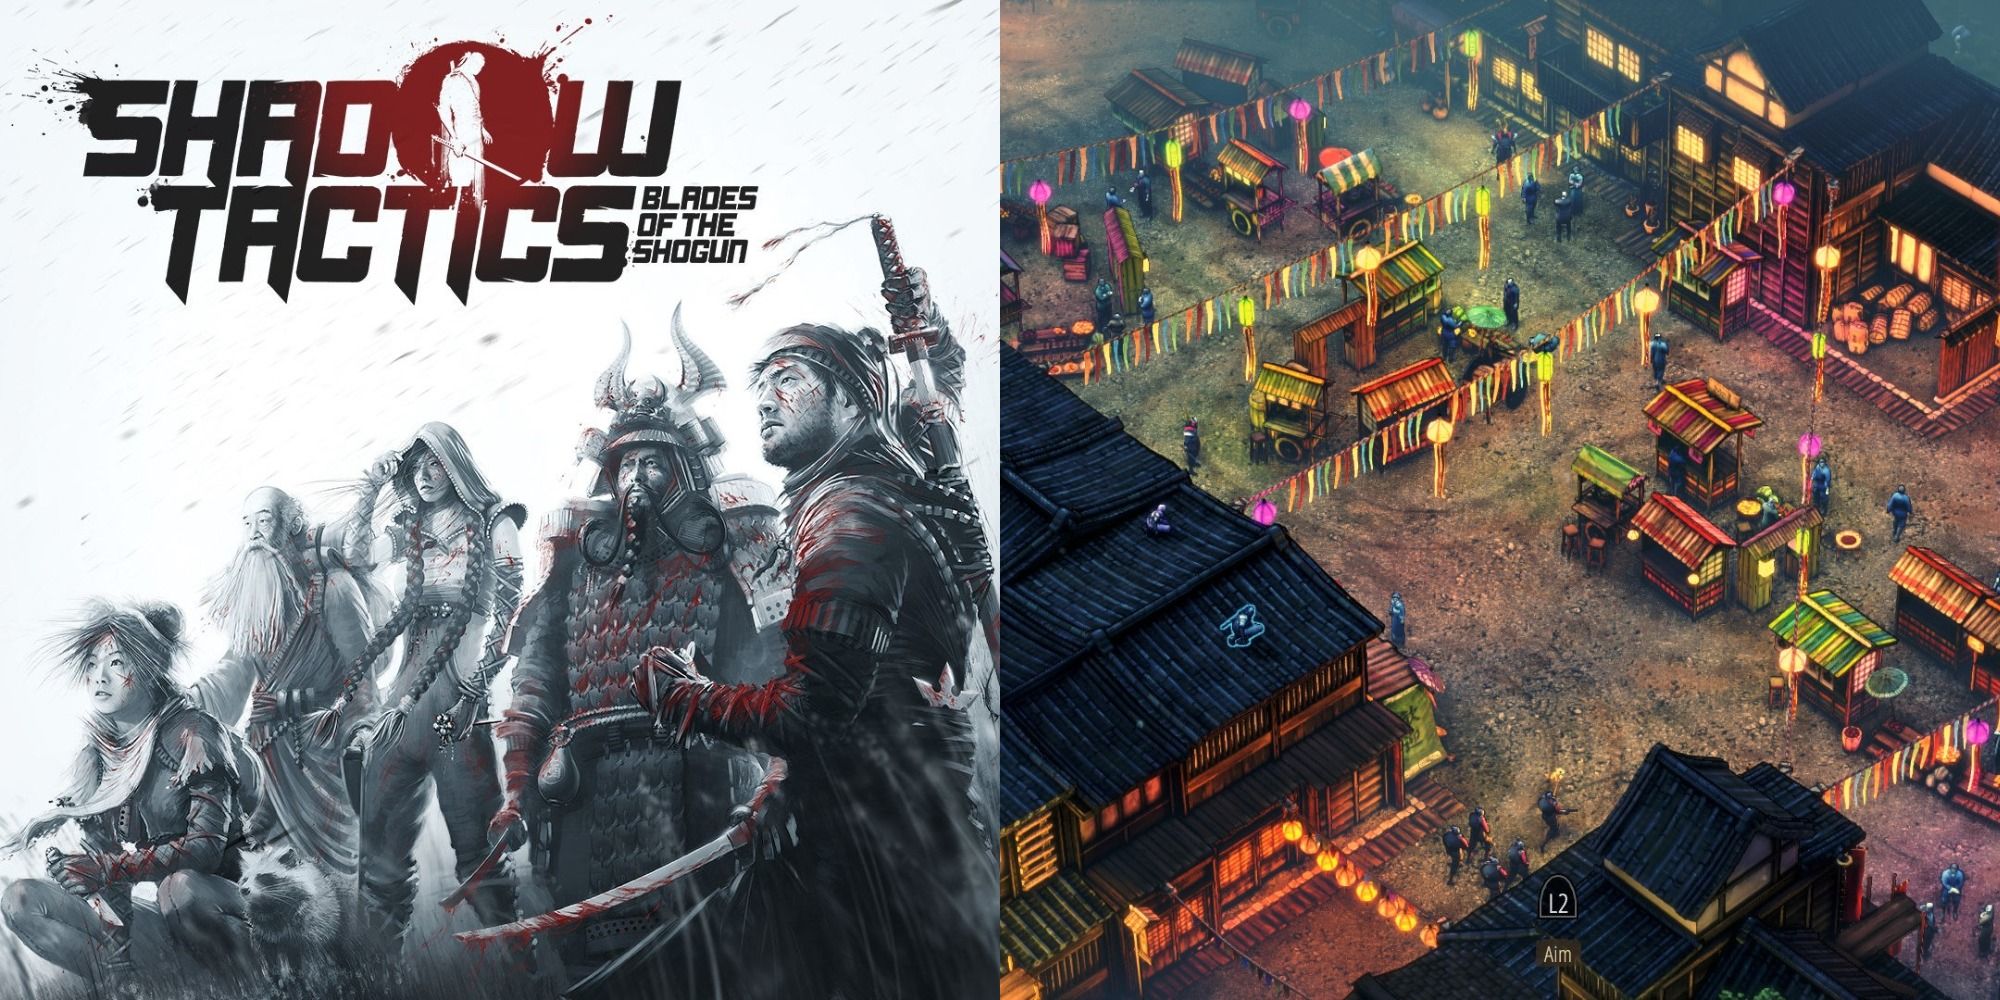 Shadow Tactics Blades of the Shogun cover art and missions